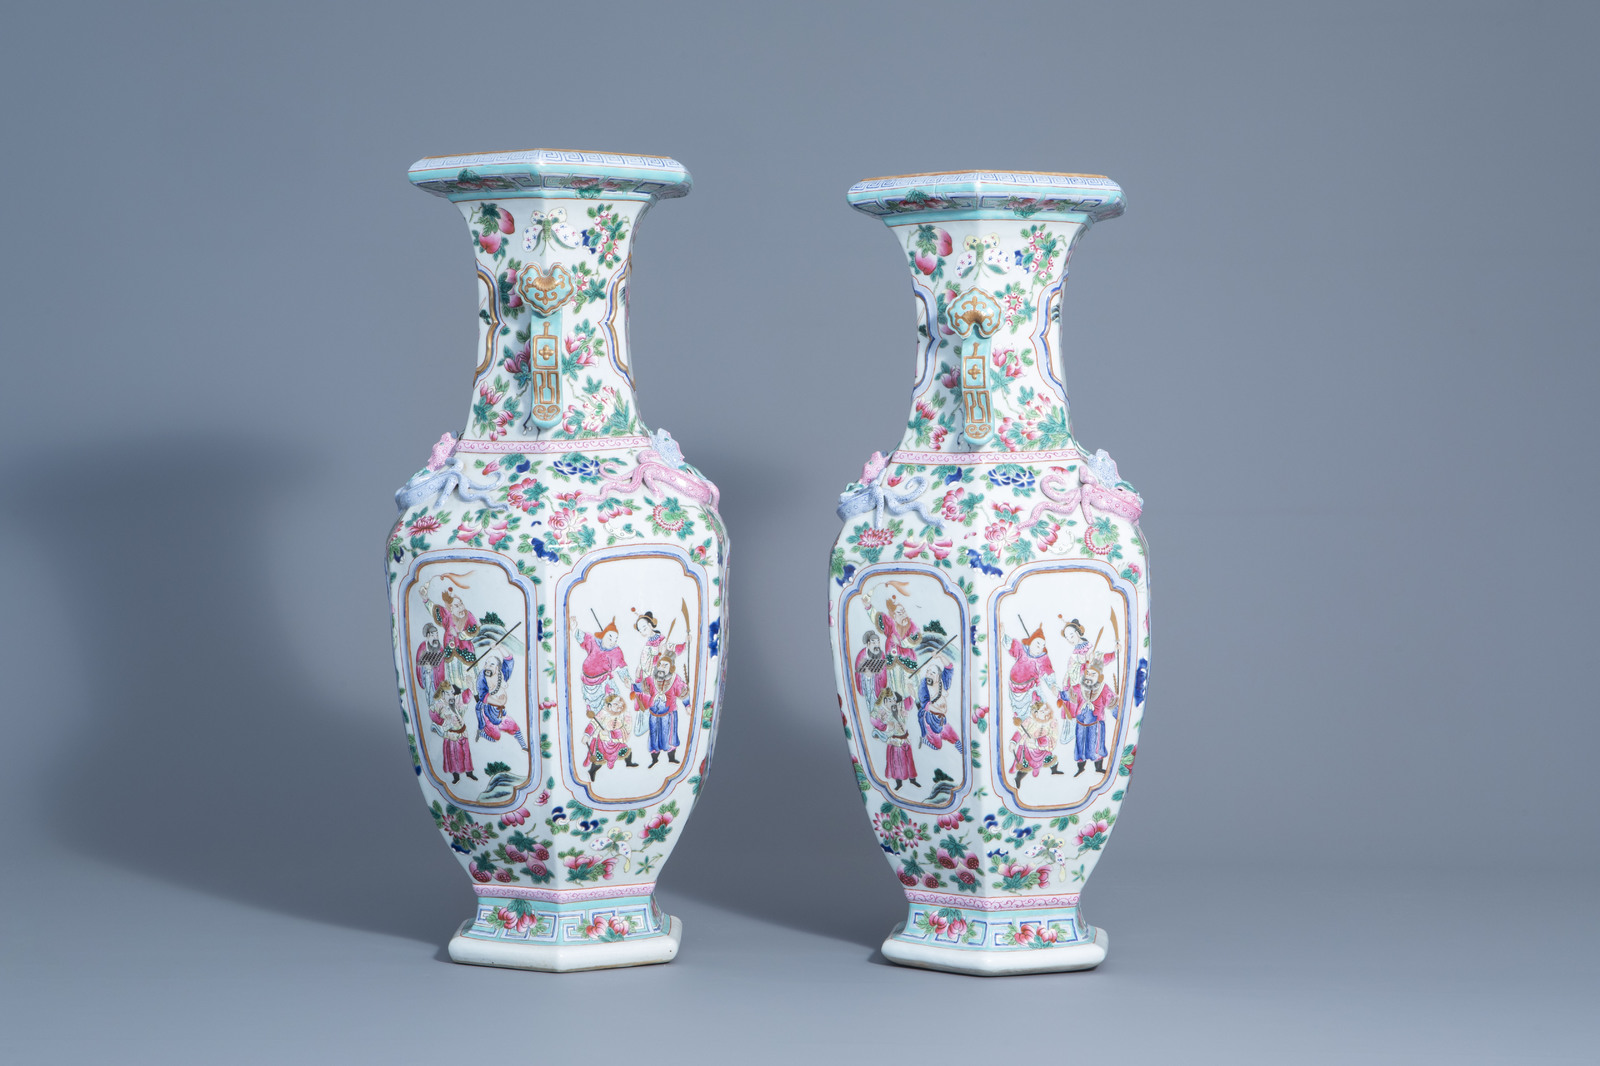 A pair of hexagonal Chinese famille rose vases with warrior scenes and floral design, 19th/20th C. - Image 4 of 6